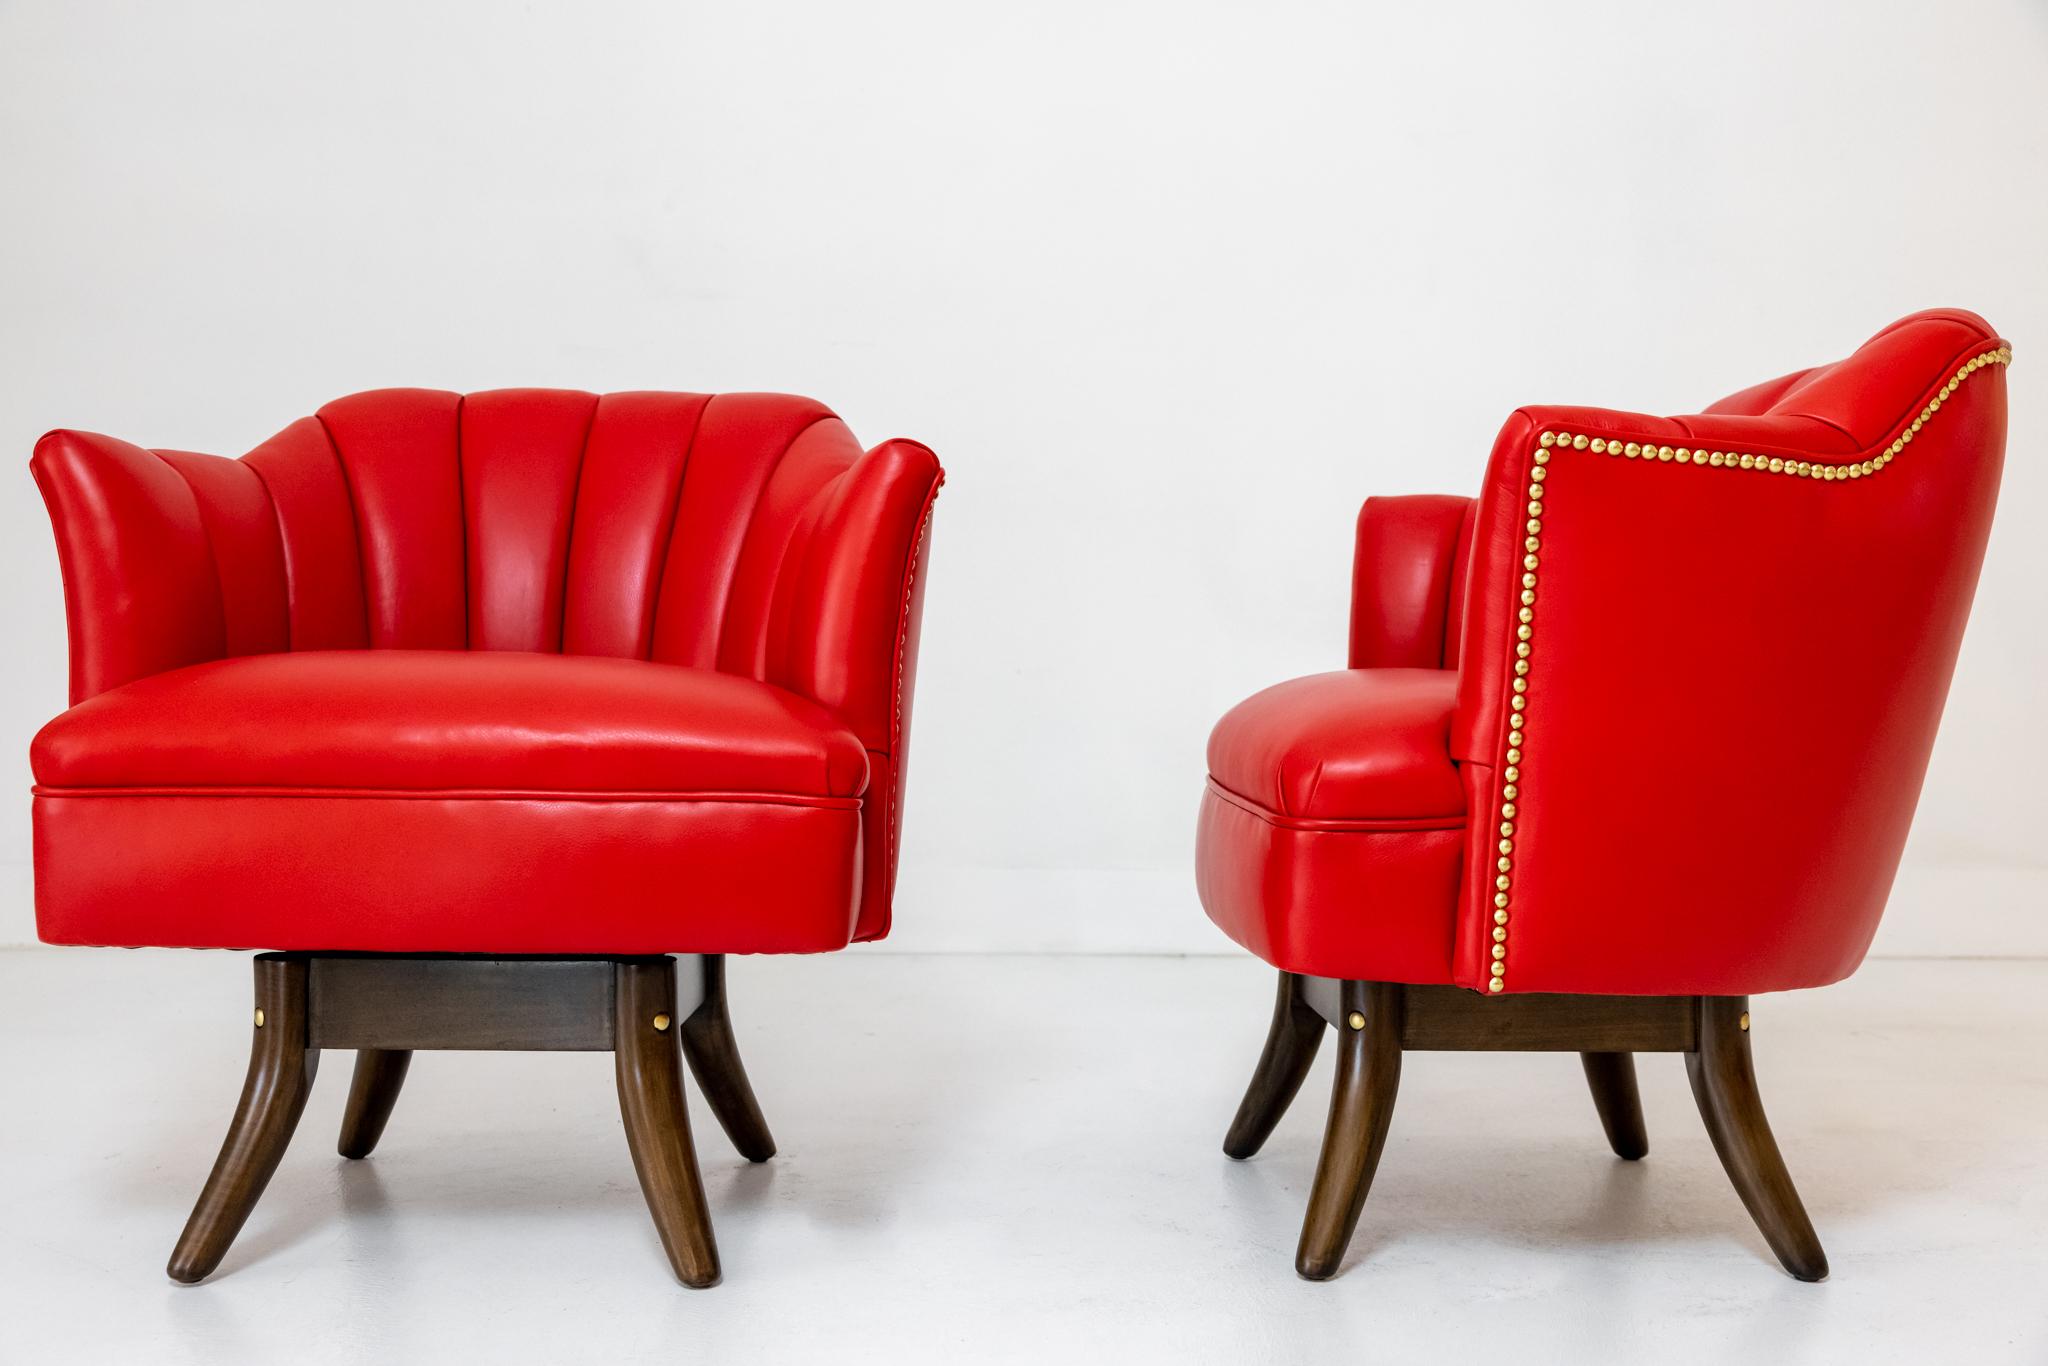 Great Mid-Century Modern swiveling tub chairs, restored with new finish and leather. These stylish chairs were purchased from the estate of Keith McCoy, a long standing fixture in the LA design scene. His showroom was legendary for representing the